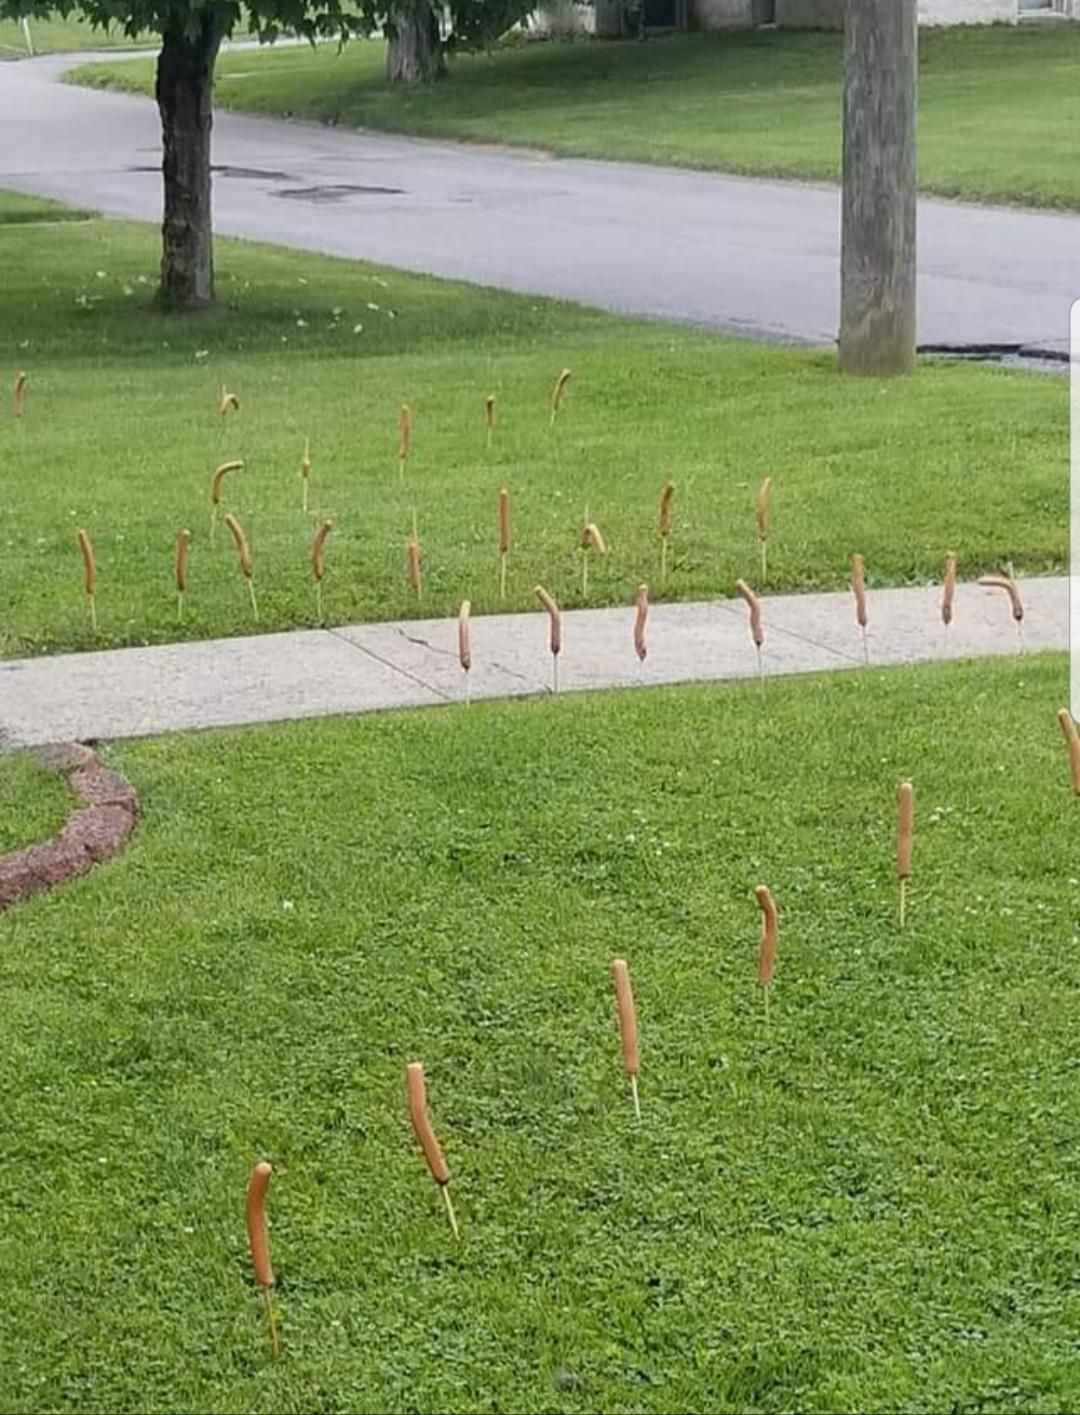 There's a Weiner Bandit in my daughter's neighborhood. I kind of hope the person doesn't get caught.